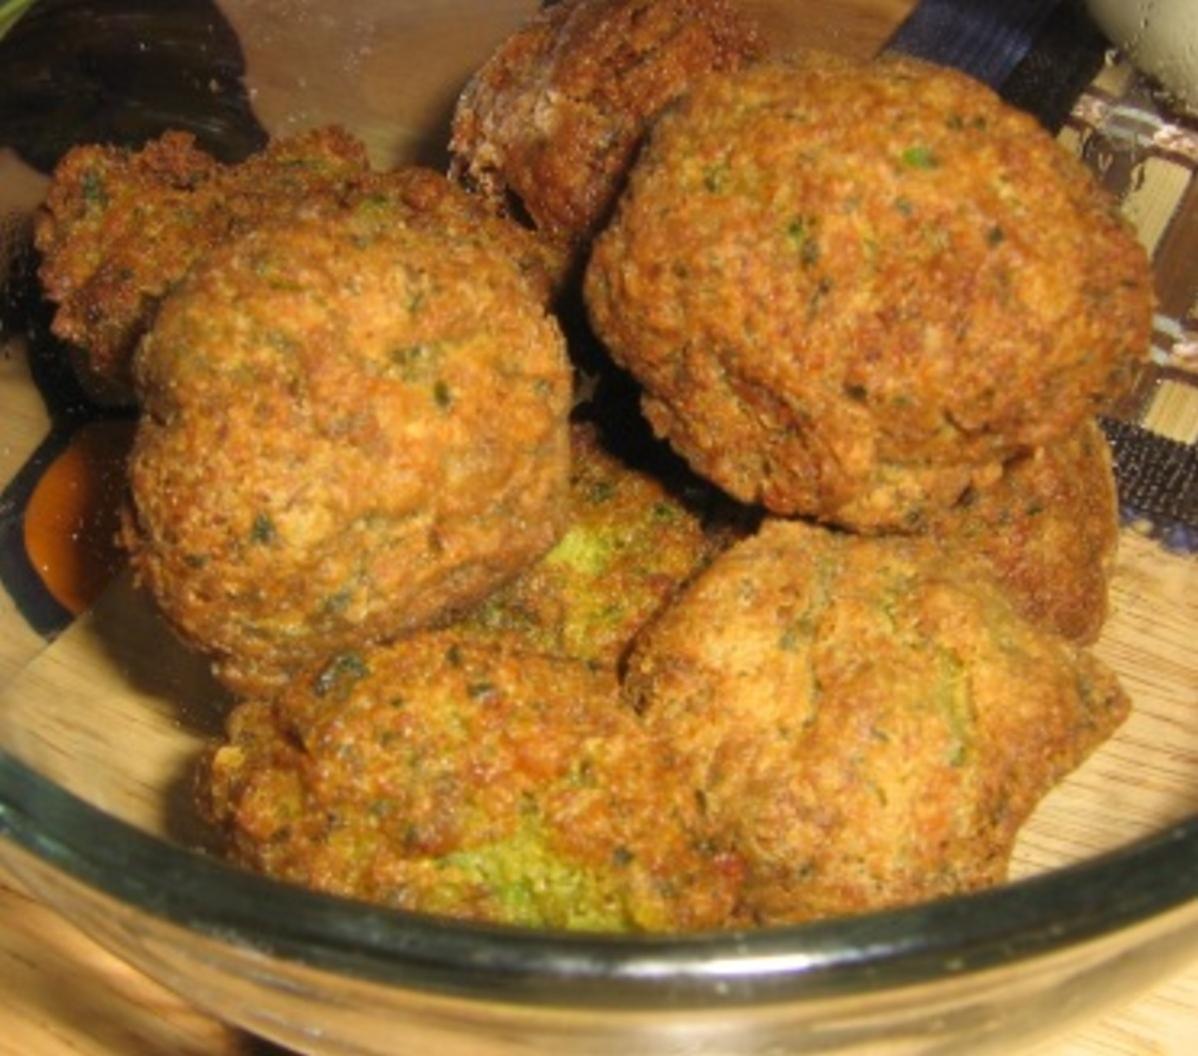  A bowl of freshly made hummus and a batch of these falafels is like music to my taste buds.